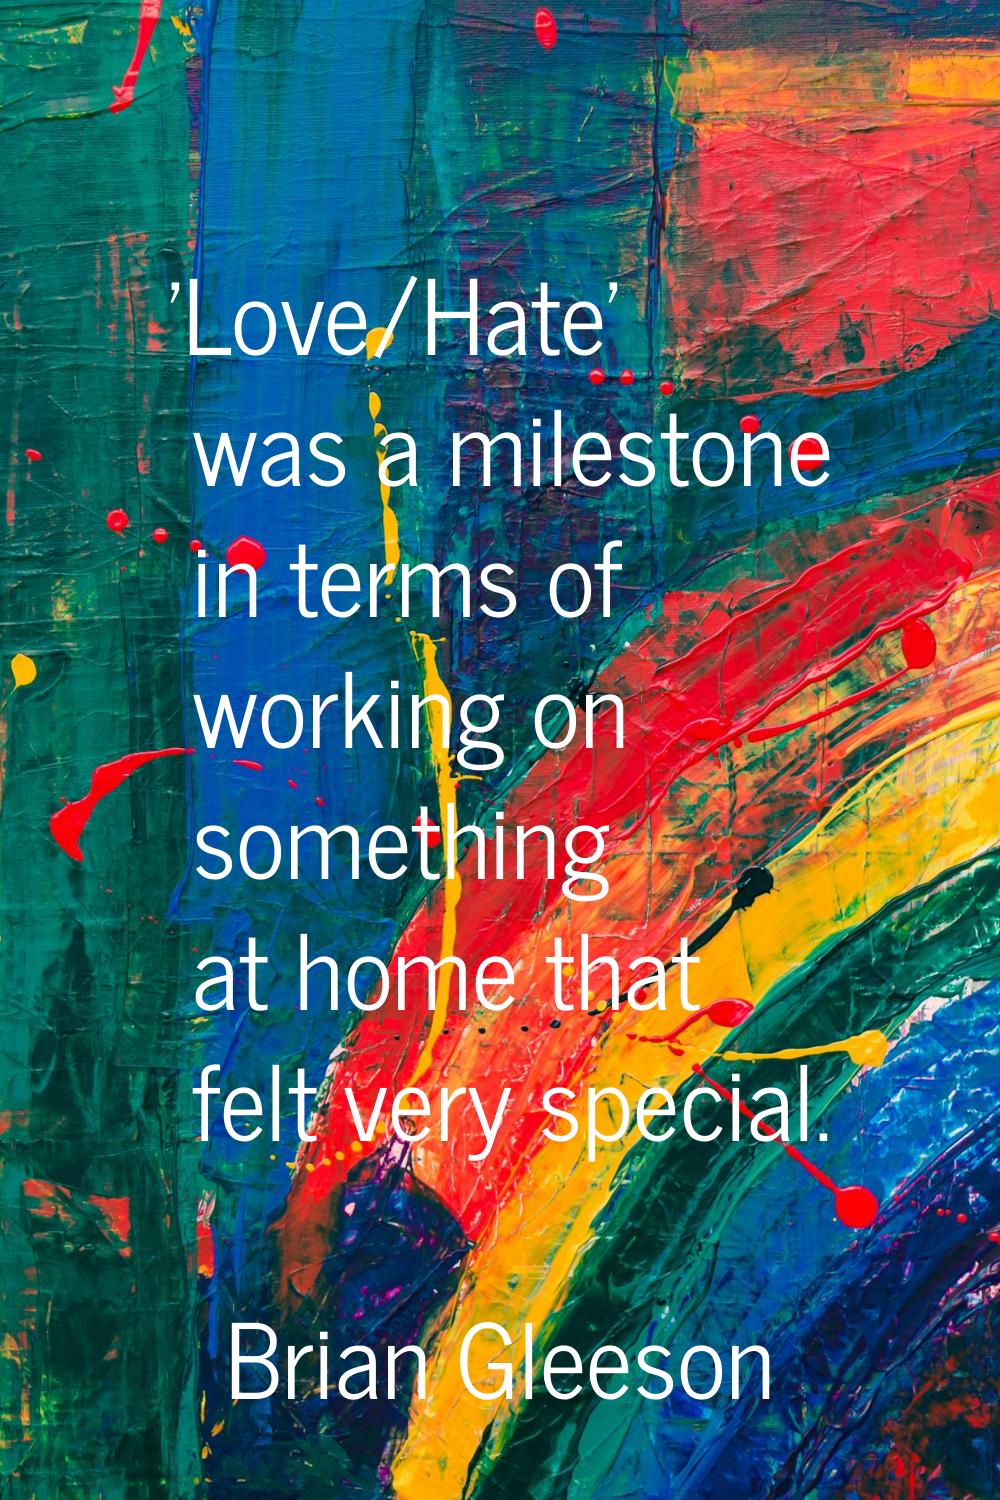 'Love/Hate' was a milestone in terms of working on something at home that felt very special.